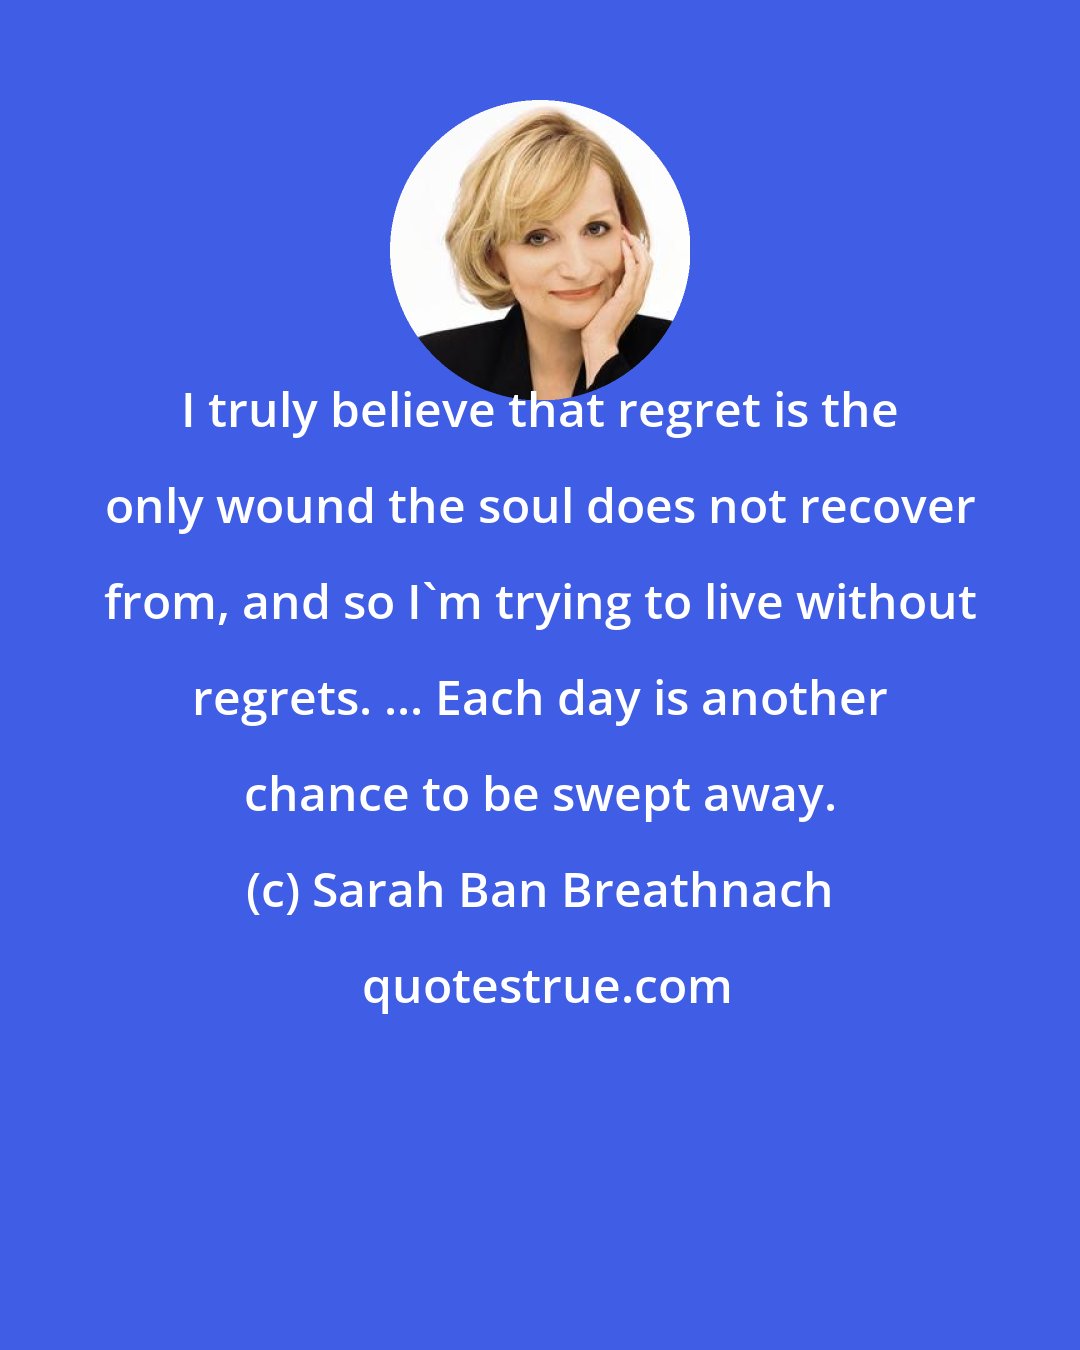 Sarah Ban Breathnach: I truly believe that regret is the only wound the soul does not recover from, and so I'm trying to live without regrets. ... Each day is another chance to be swept away.